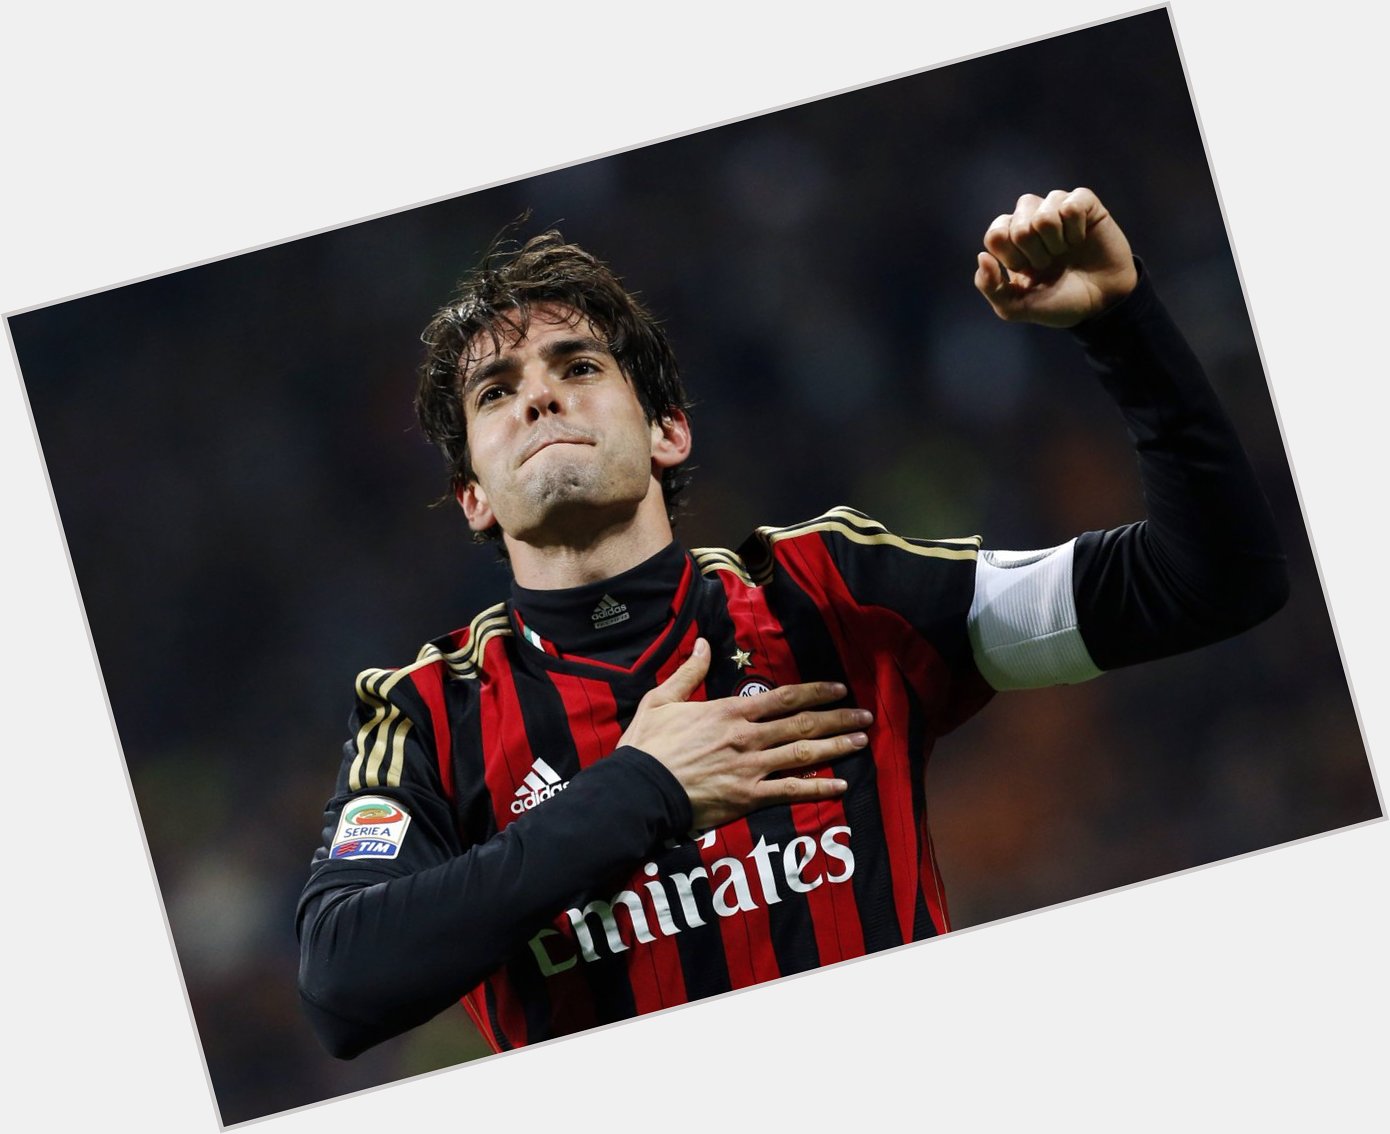 Happy 33rd birthday to Kaká. He\s scored 216 goals in 673 games during a glittering career for club and country. 